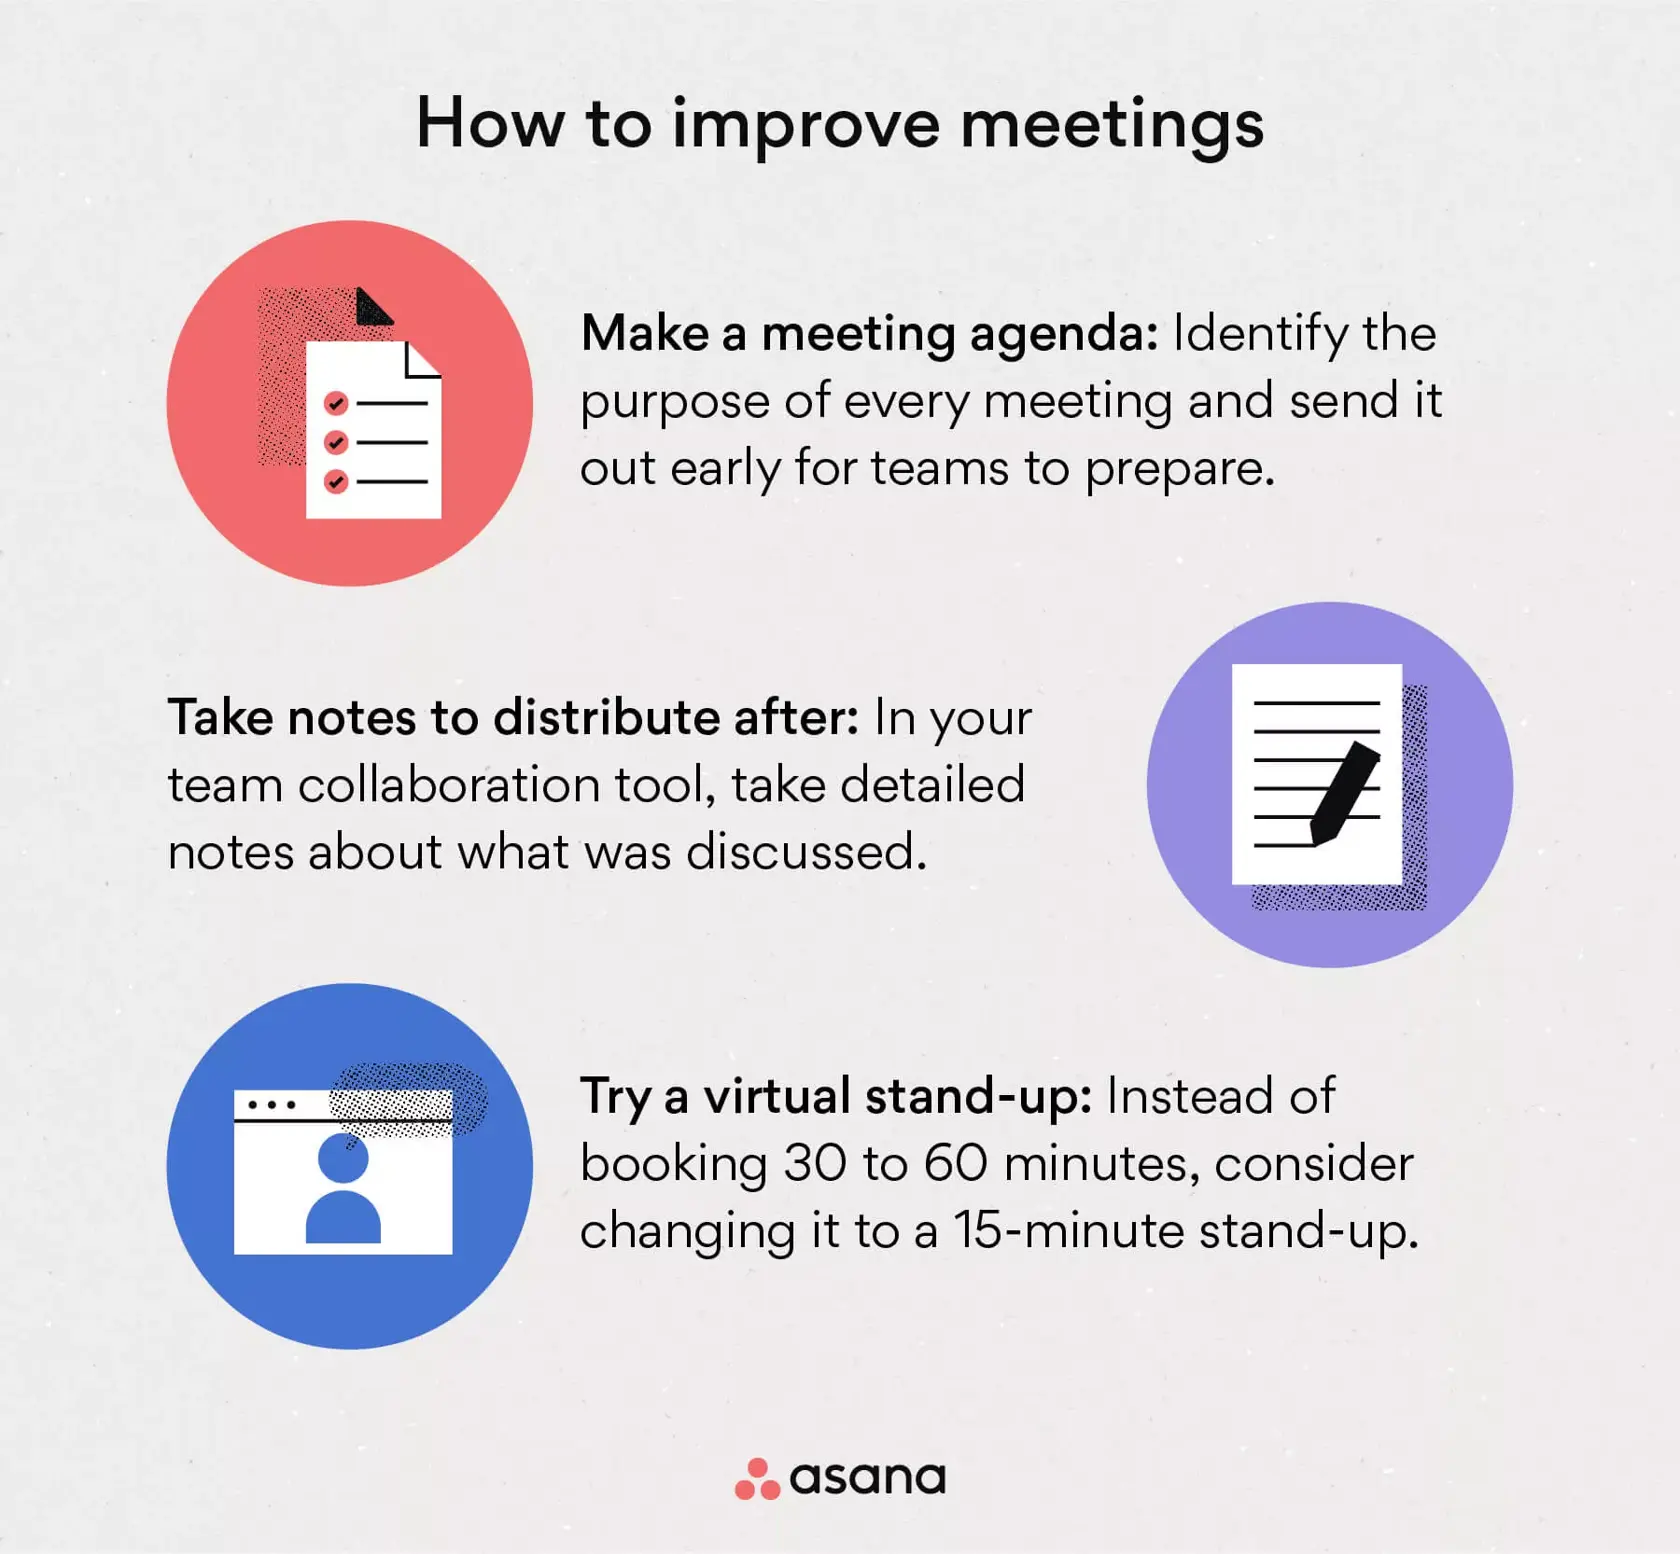 [inline illustration] How to improve meetings (infographic)